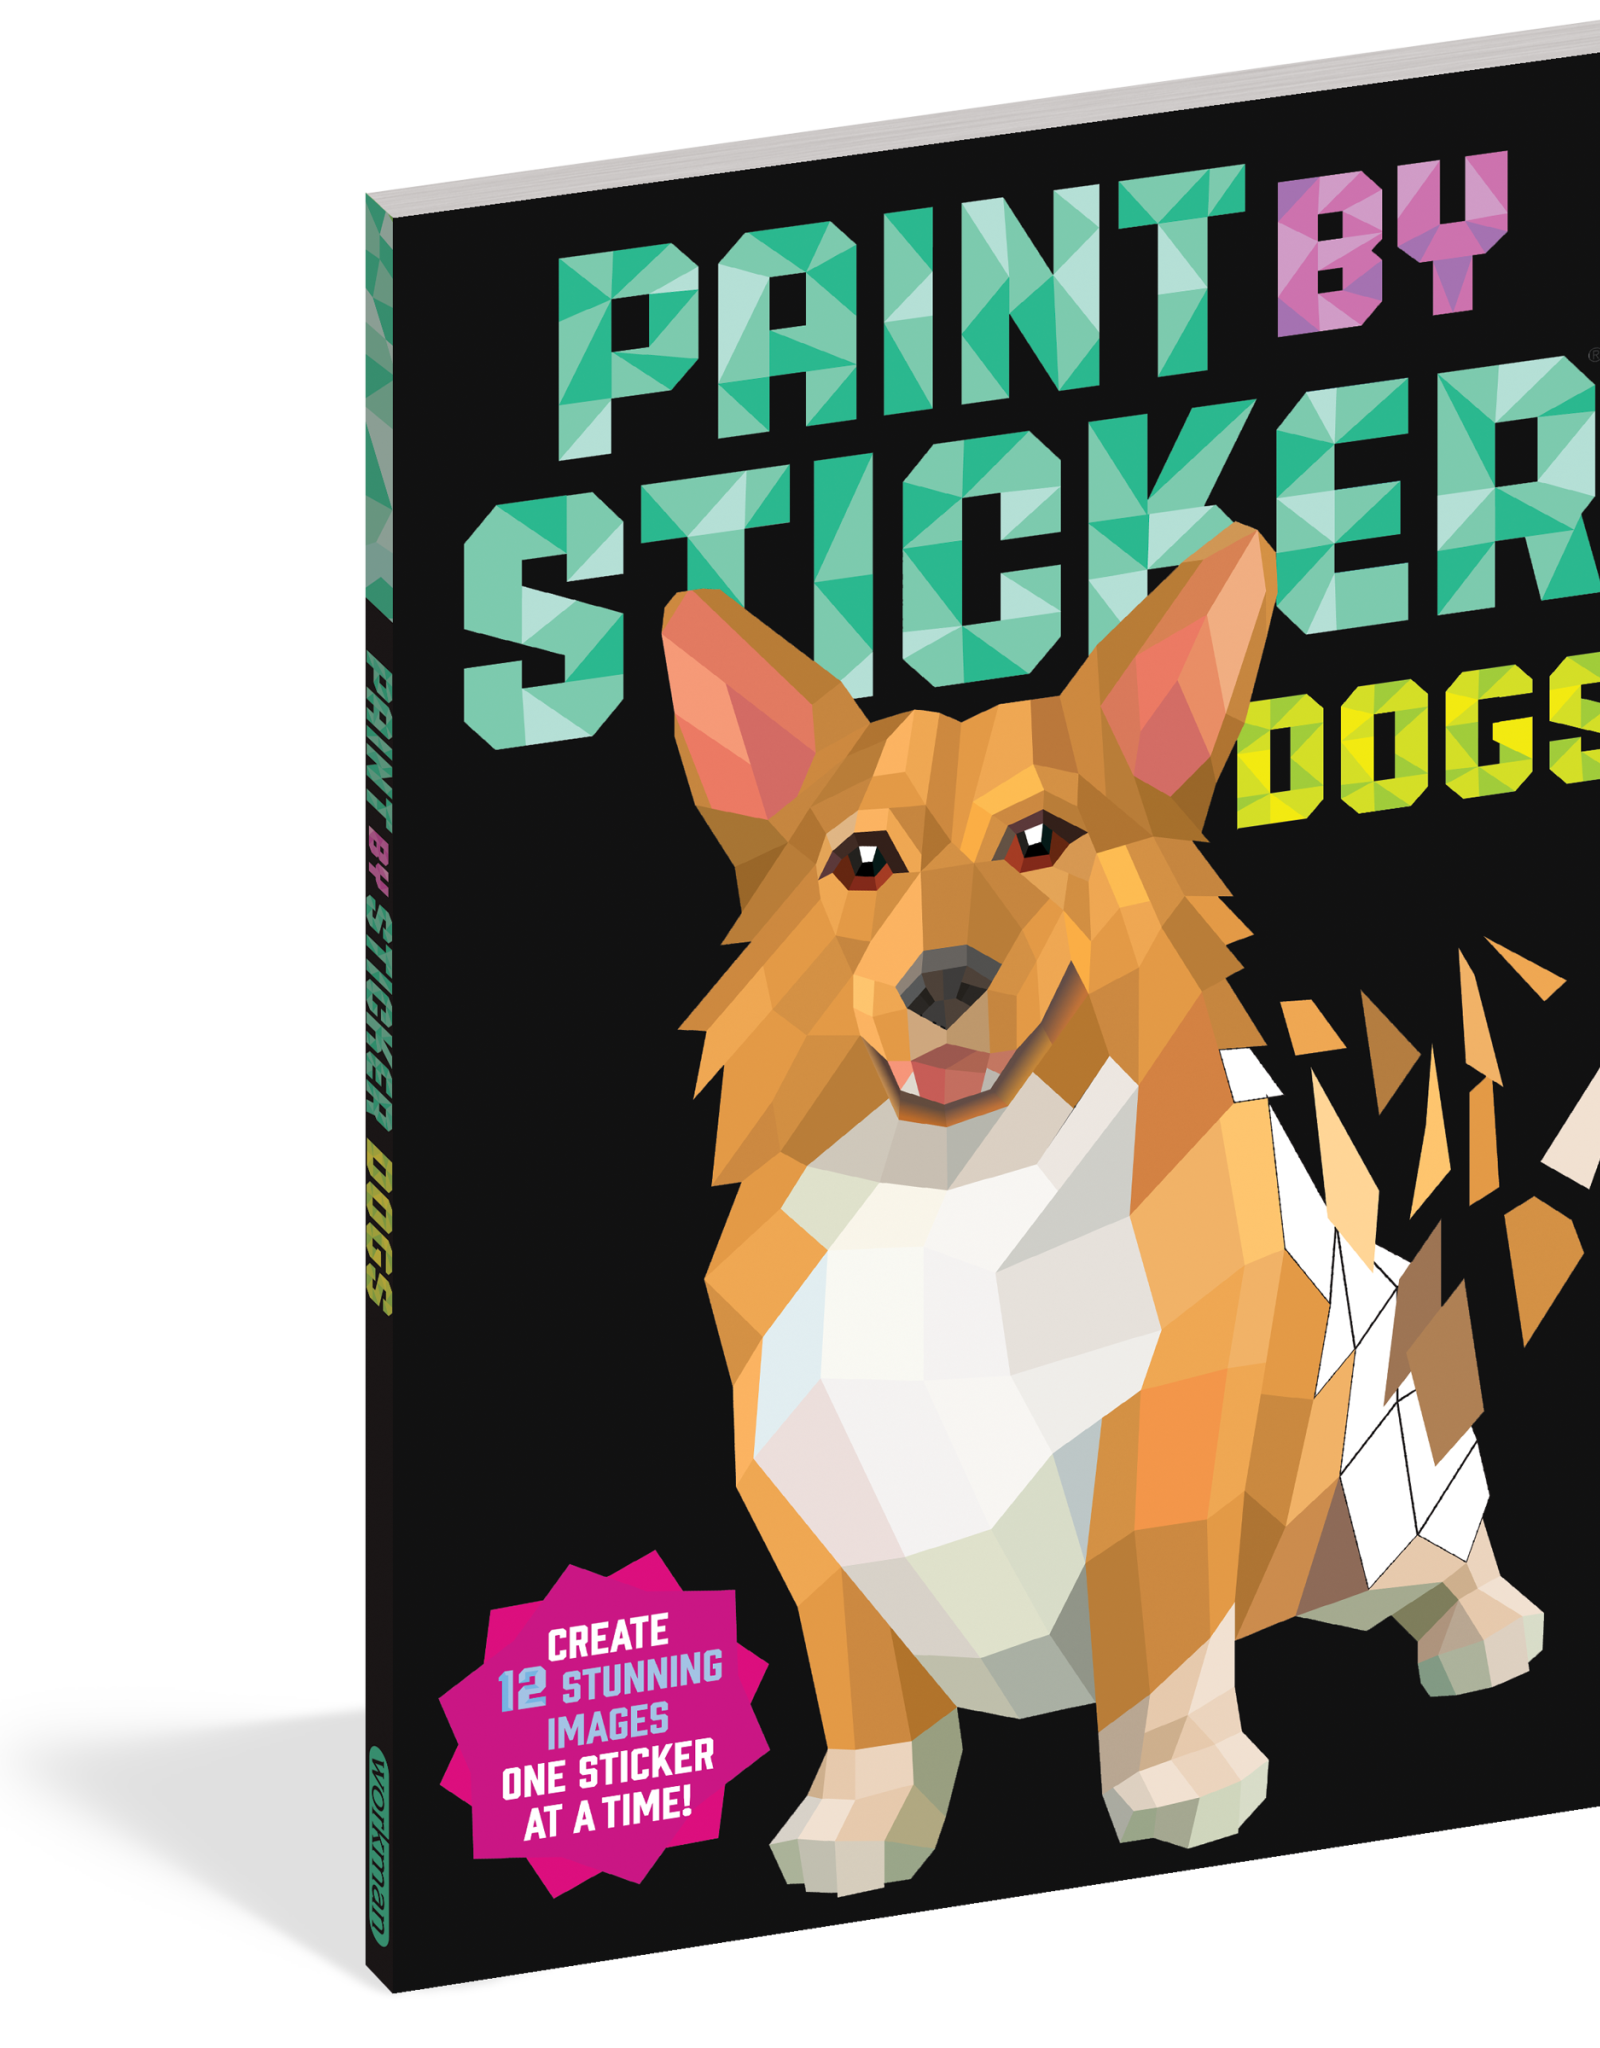 Workman Publishing Paint By Sticker: Dogs